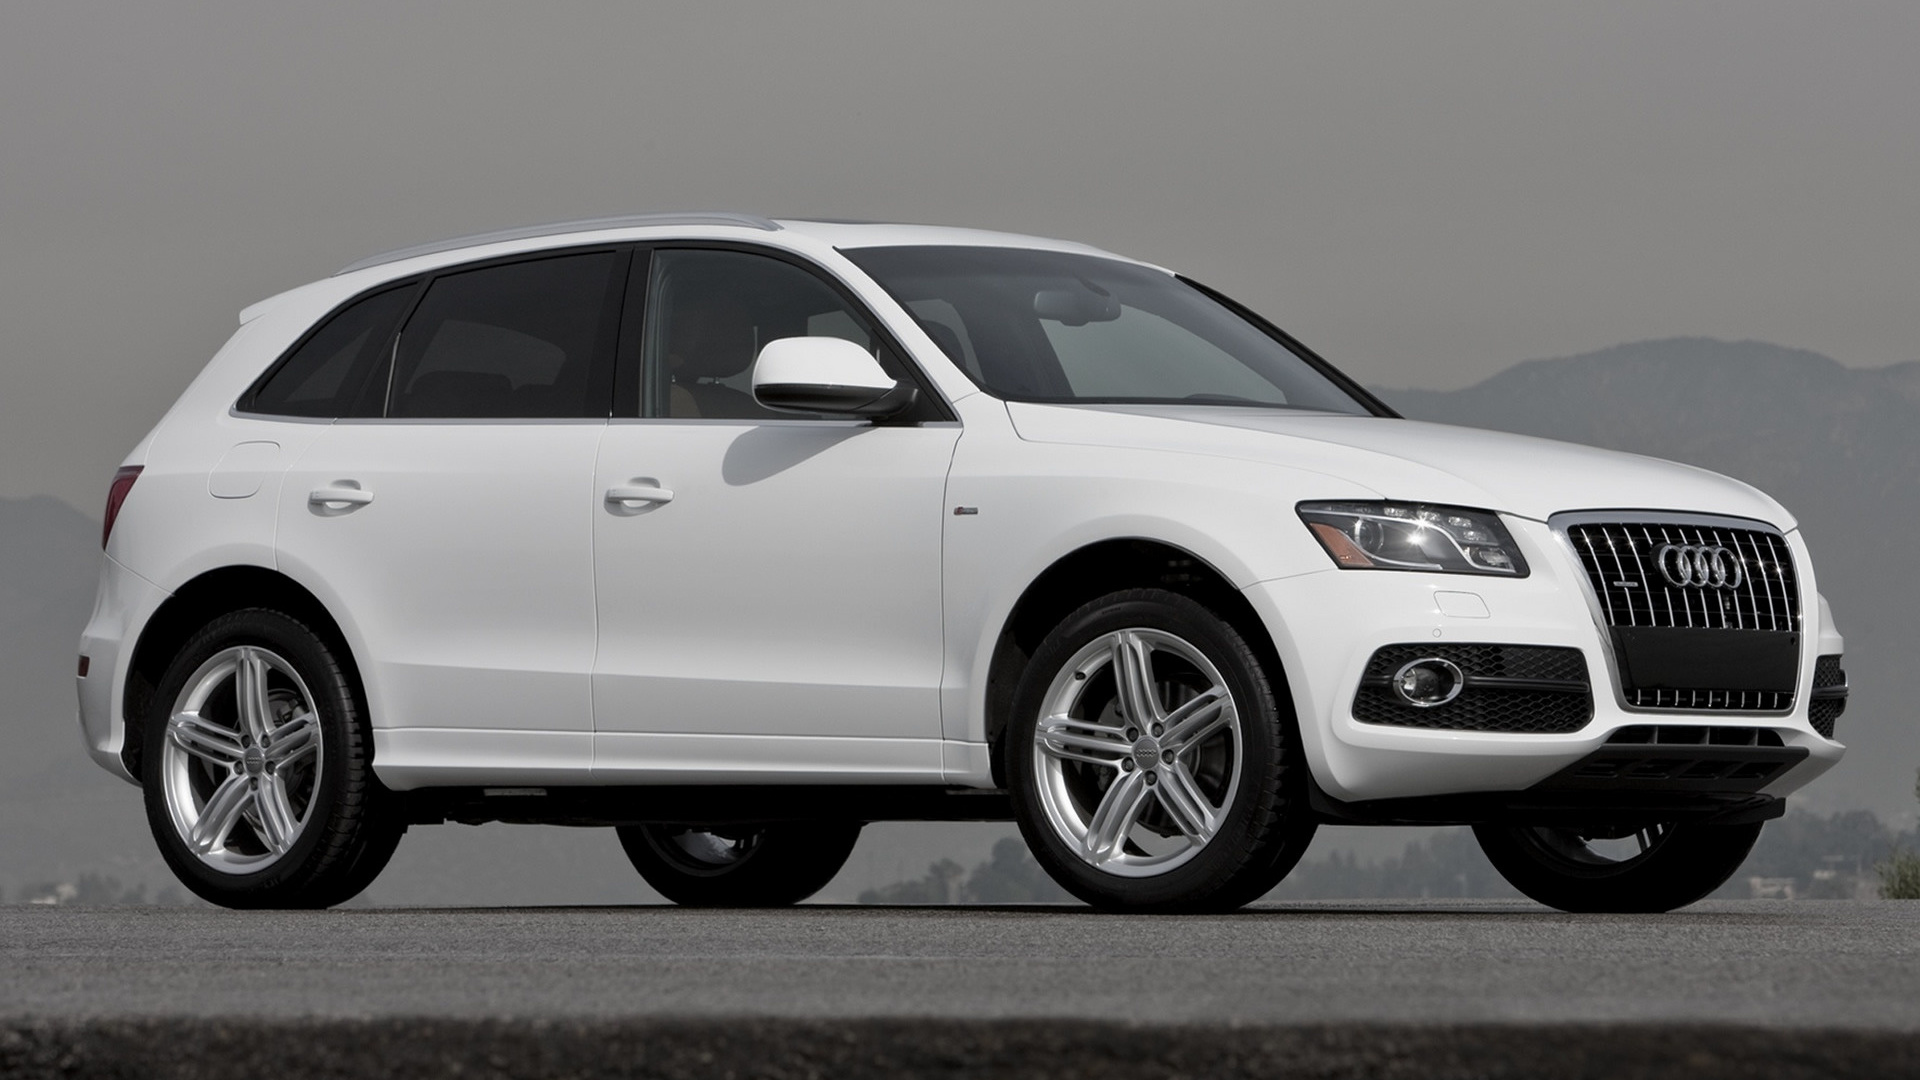 2009 Audi Q5 S line (US) - Wallpapers and HD Images | Car ...